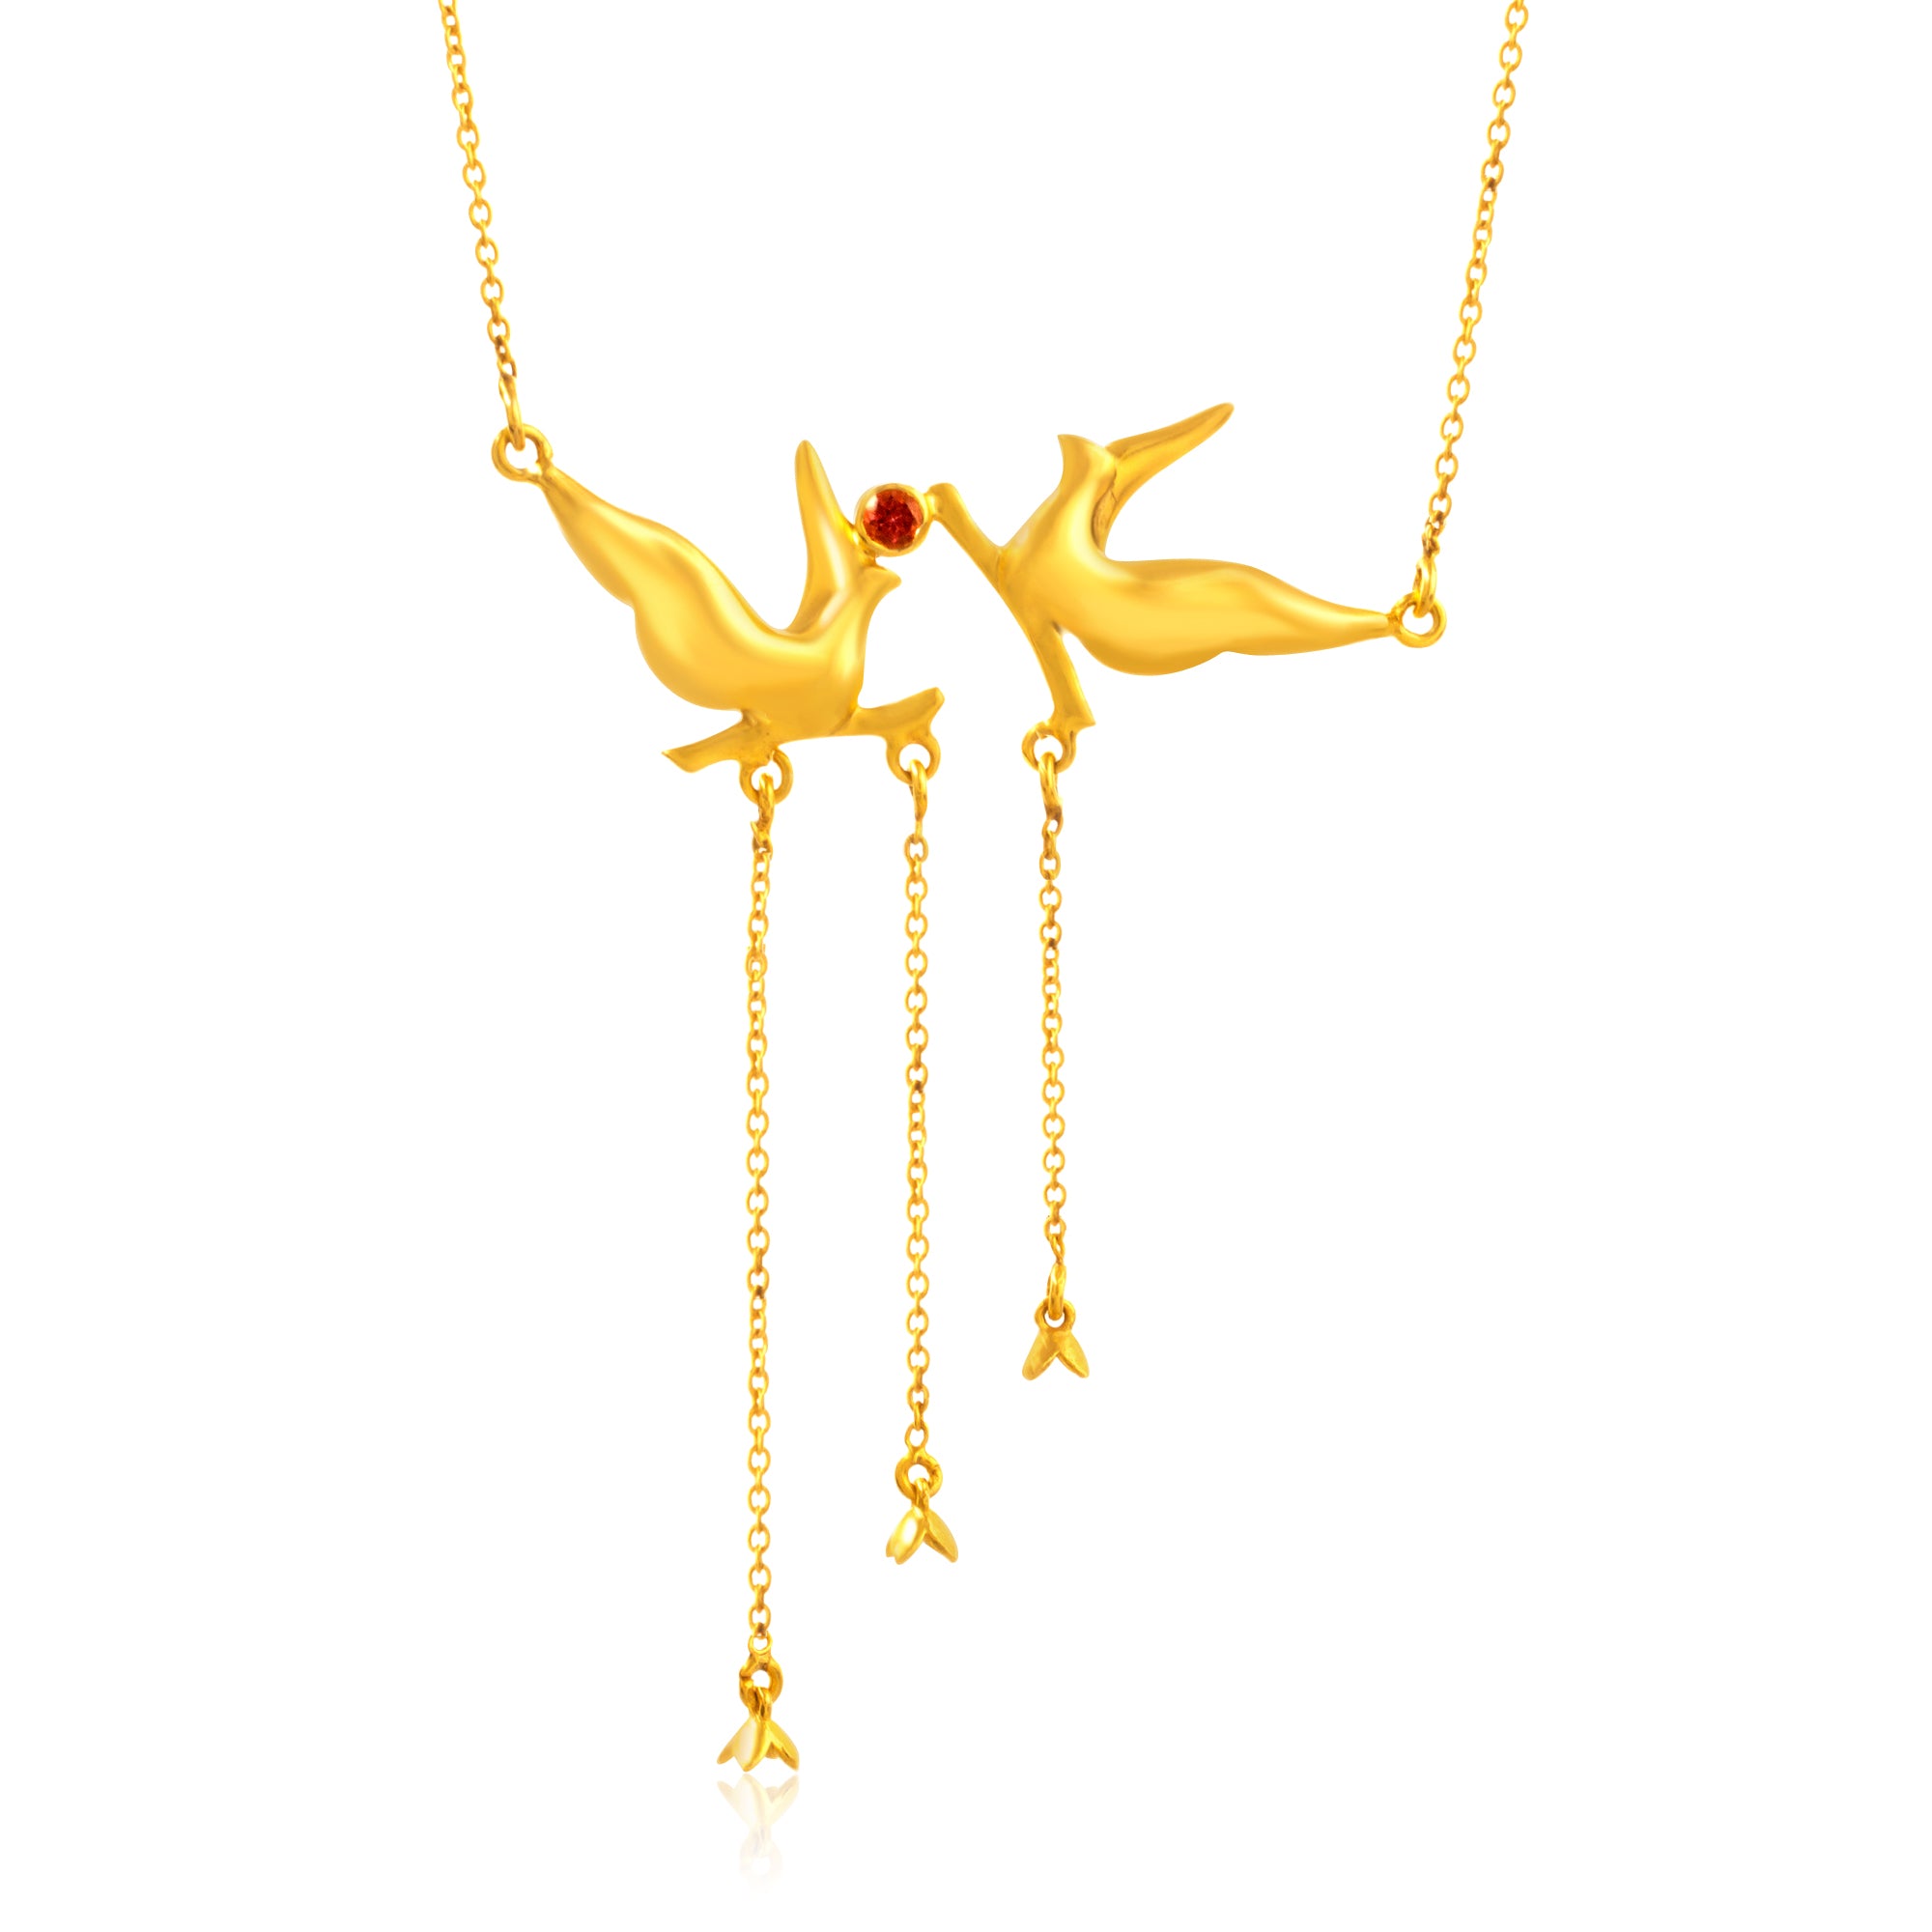 The gold Kiss of Love Necklace